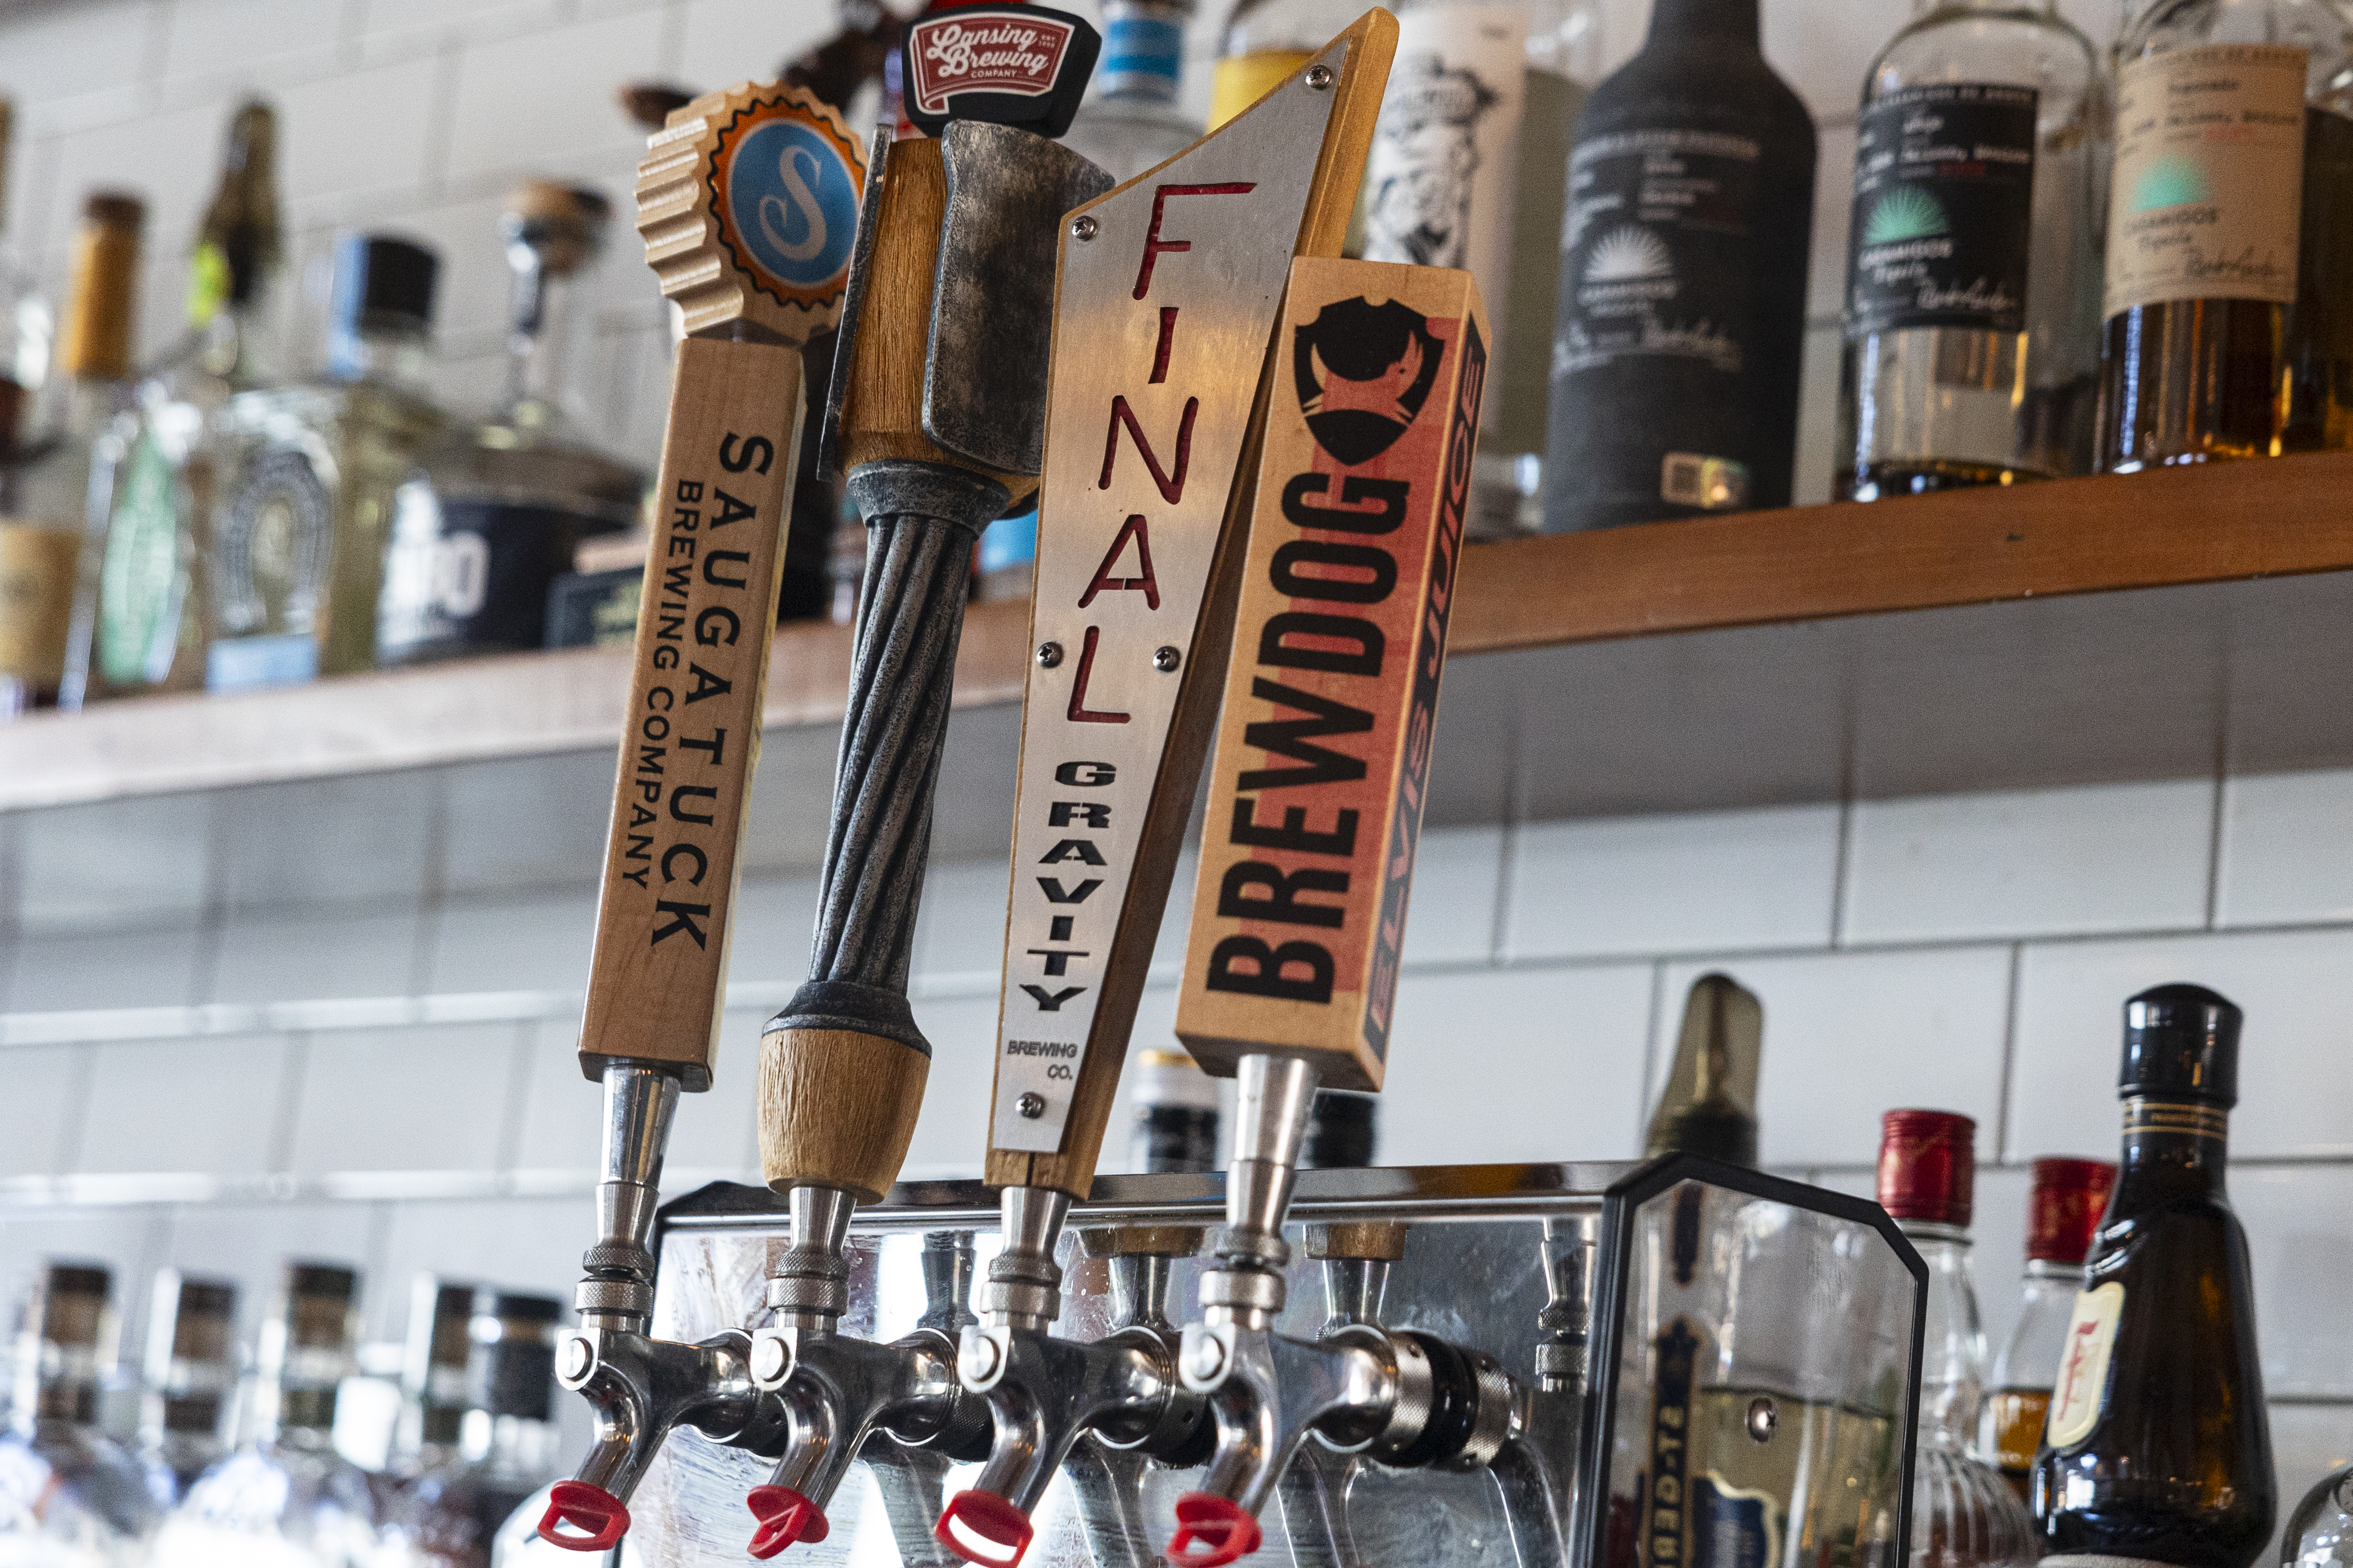 Draft beers at Compass and Cleaver— a collaboration from the owners of South Kitchen and Kitchen House at 12454 E D Ave. in Richland, Michigan.